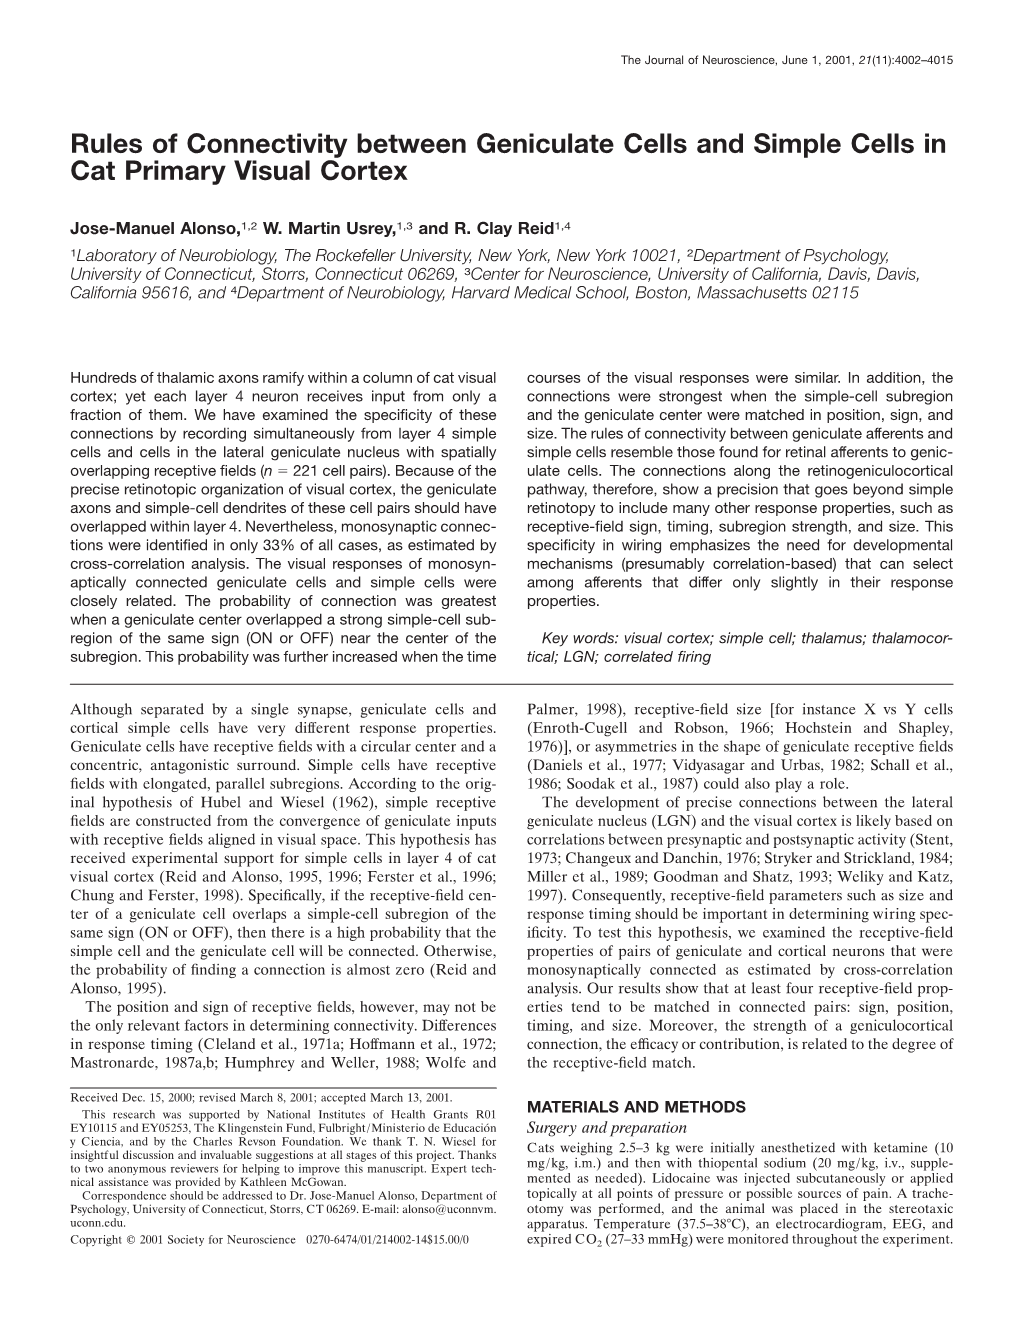 Rules of Connectivity Between Geniculate Cells and Simple Cells in Cat Primary Visual Cortex